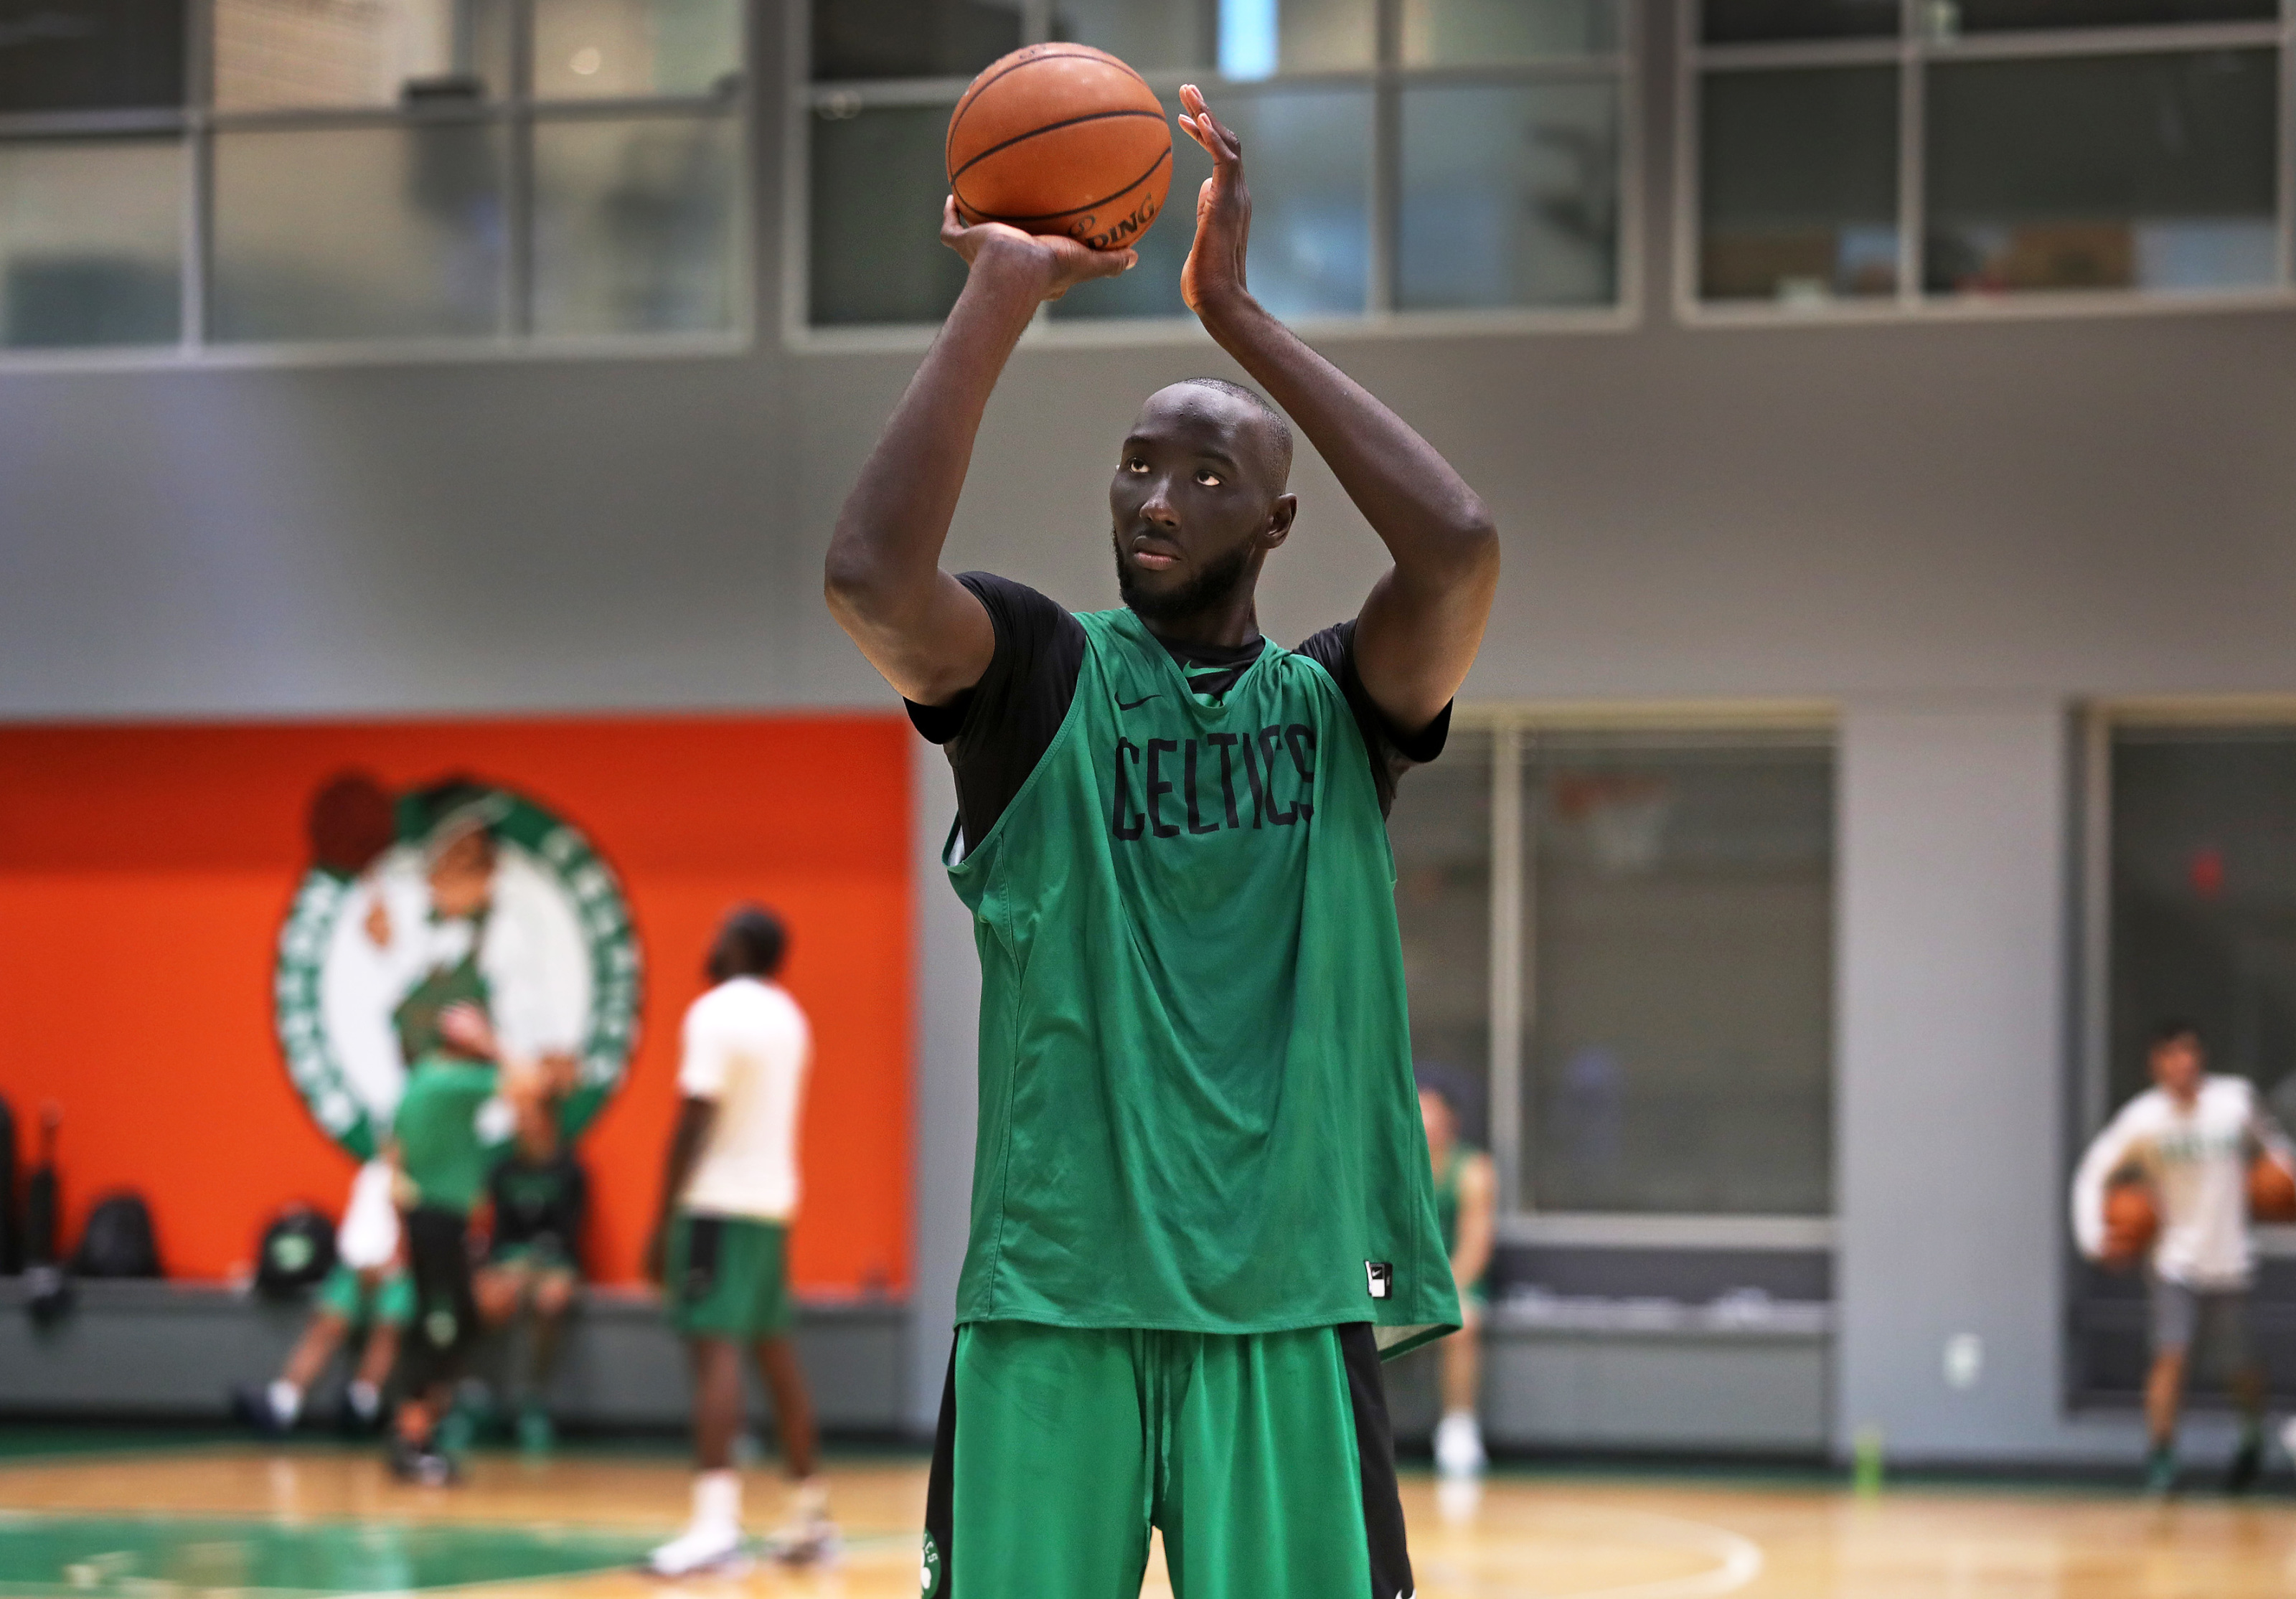 Tacko Fall returning to Celtics, Red Claws on two-way contract